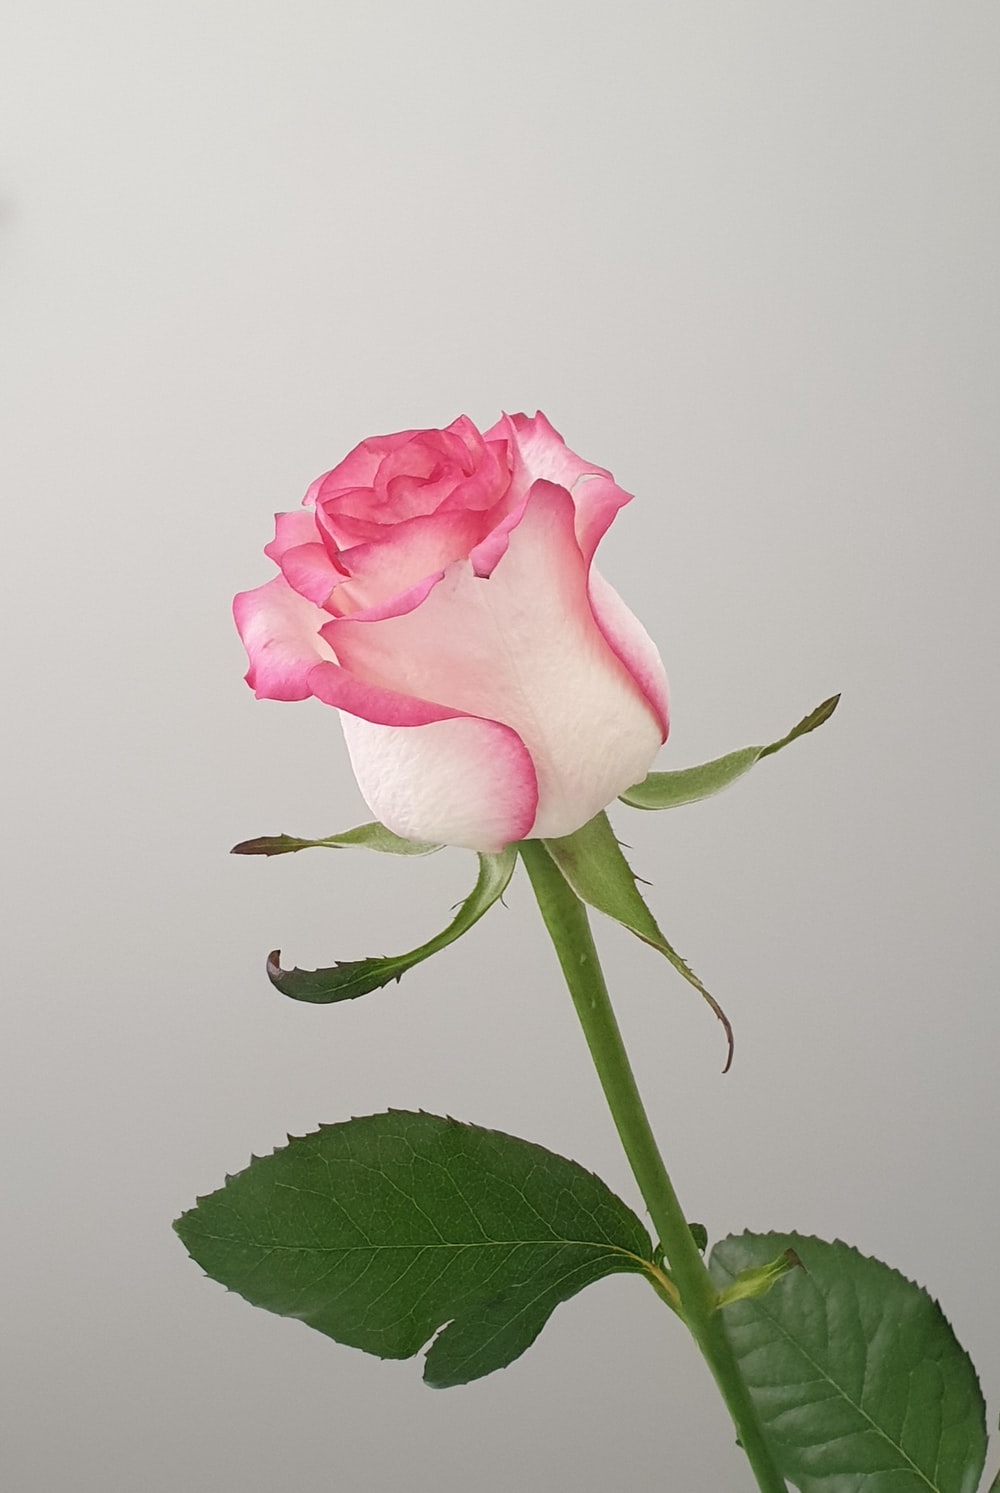 Flowers Pictures Free Download Rose